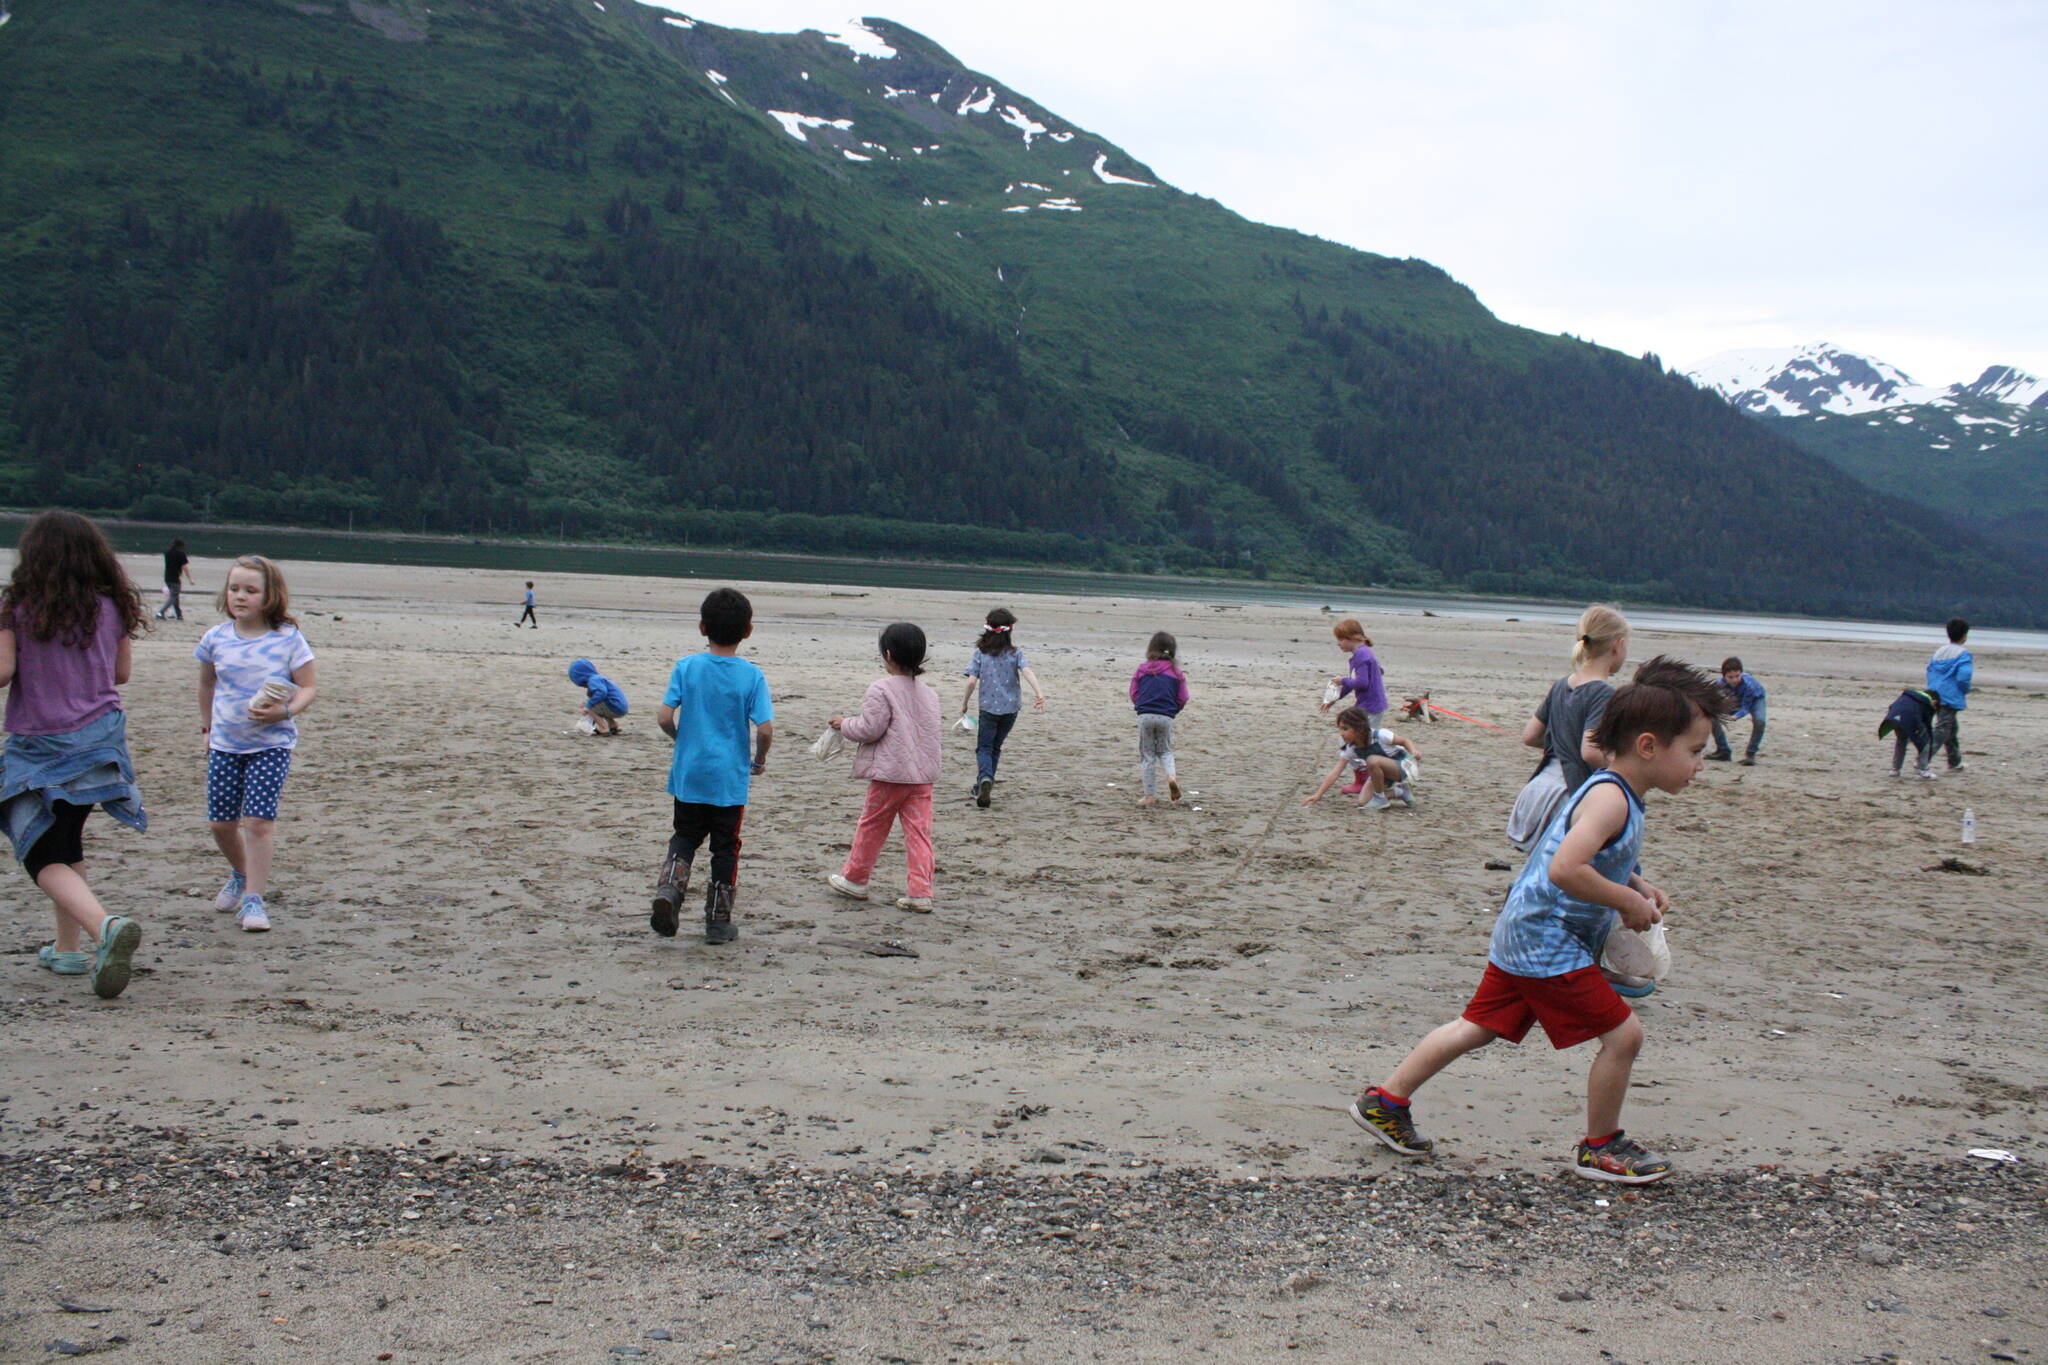 Children pick up sand dollars on Sandy Beach on July 3. The end of this week is expected to be ideal beach weather with near-record temperatures forecast in Juneau and elsewhere in Southeast Alaska. (Therese Pokorney / Juneau Empire File)